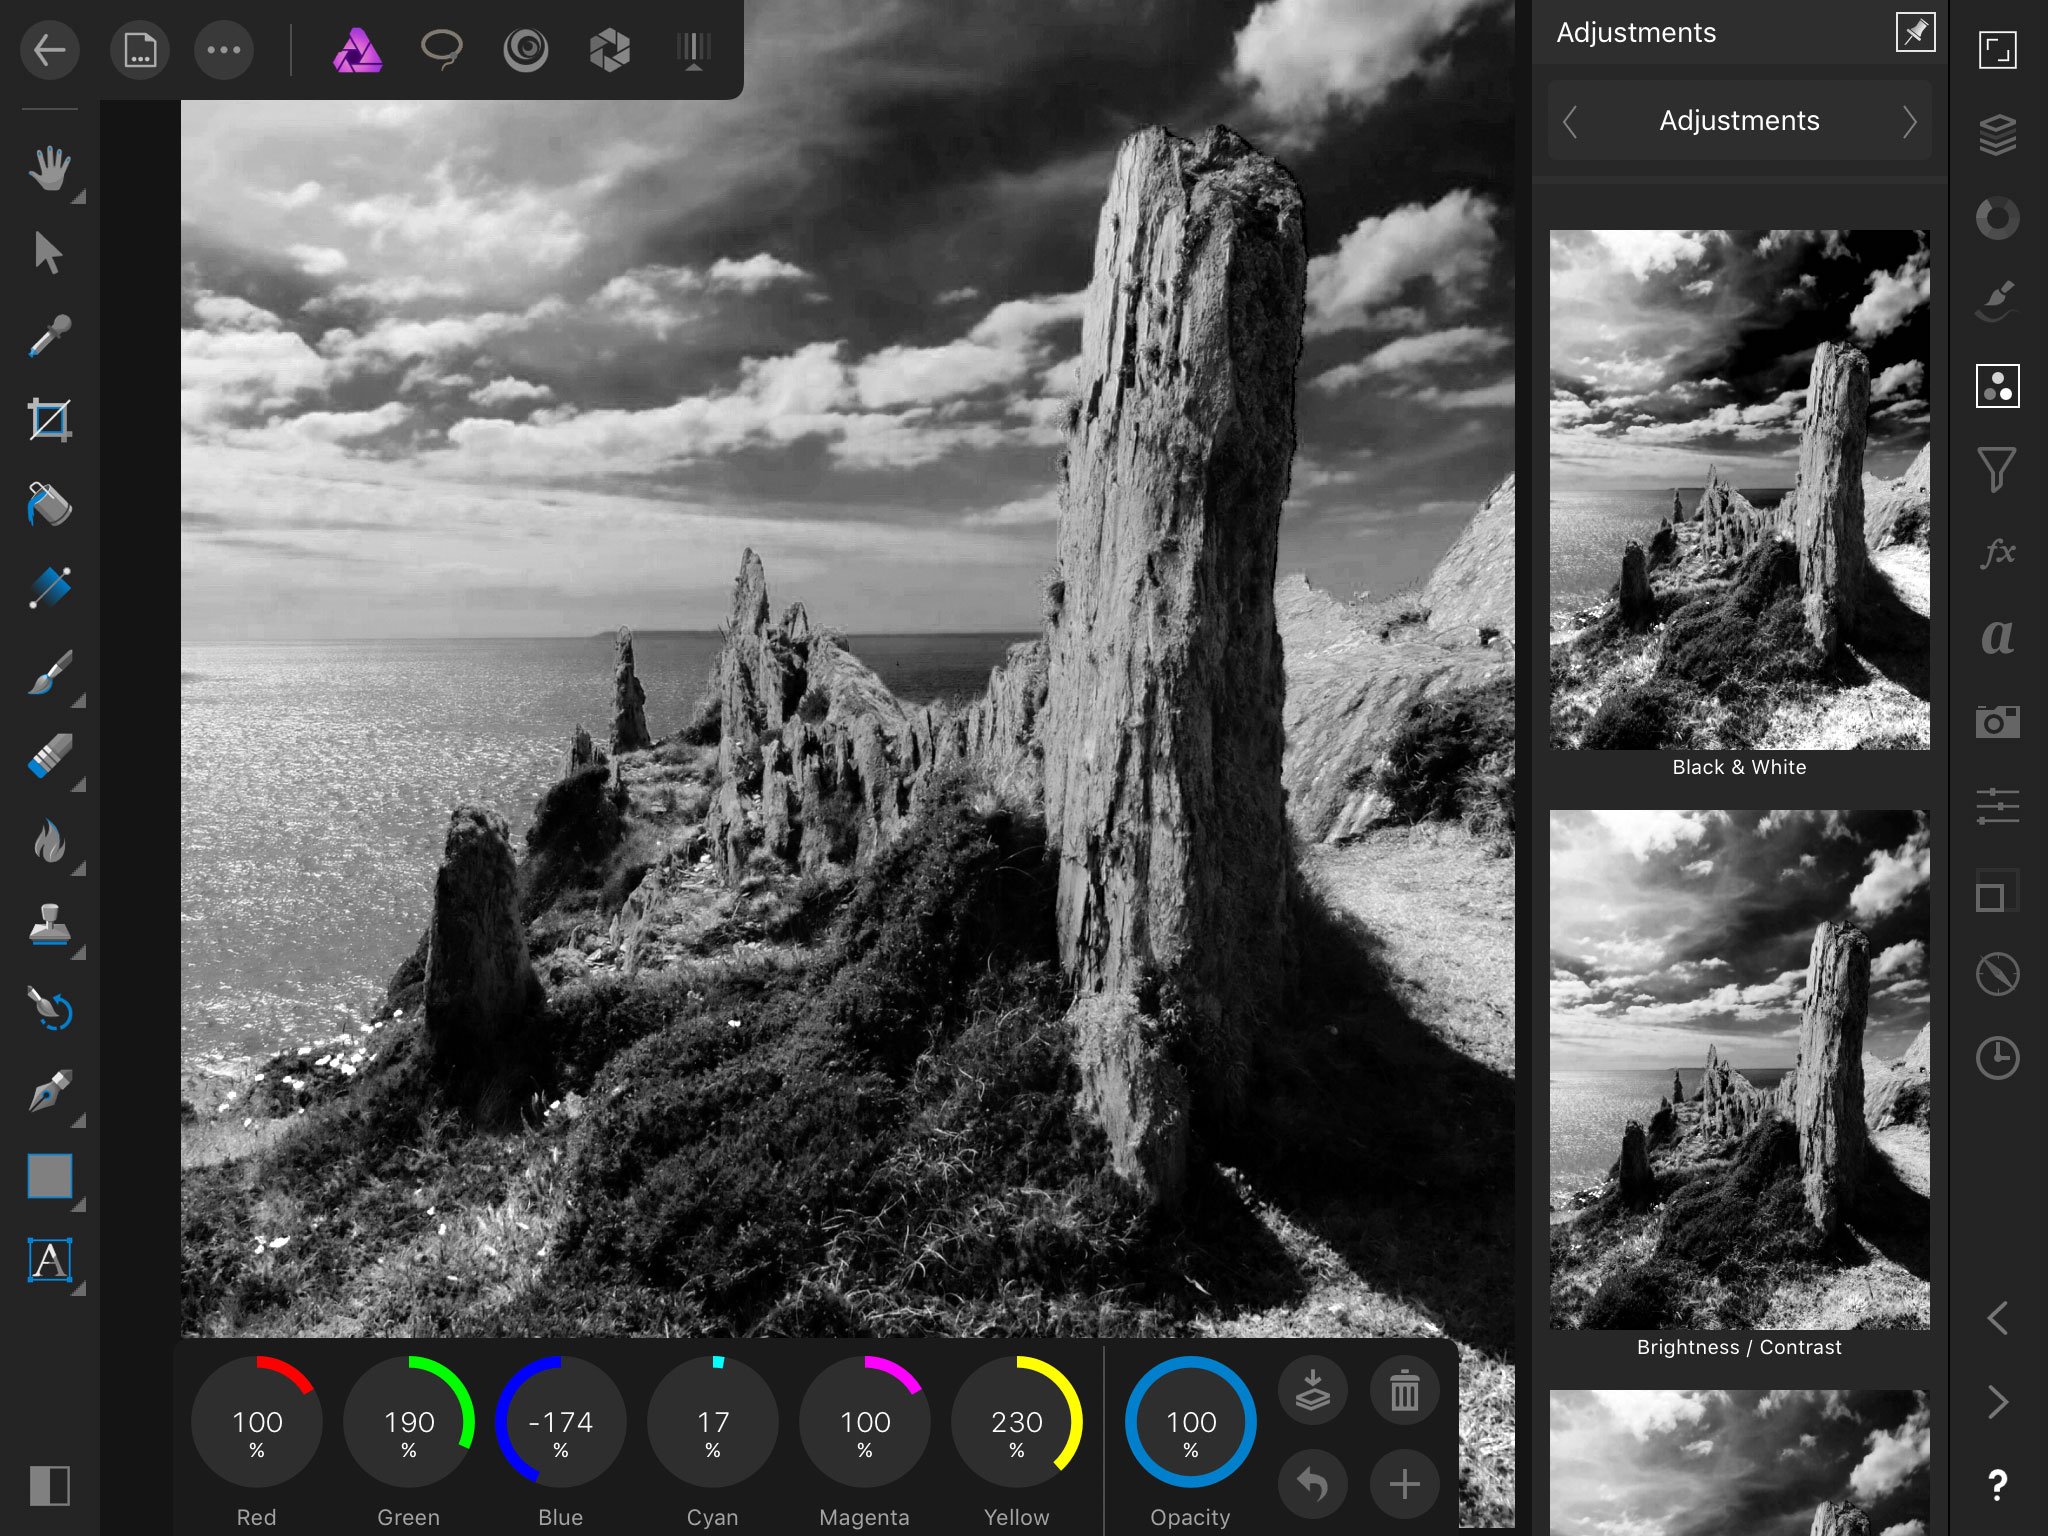 affinity photo presets download